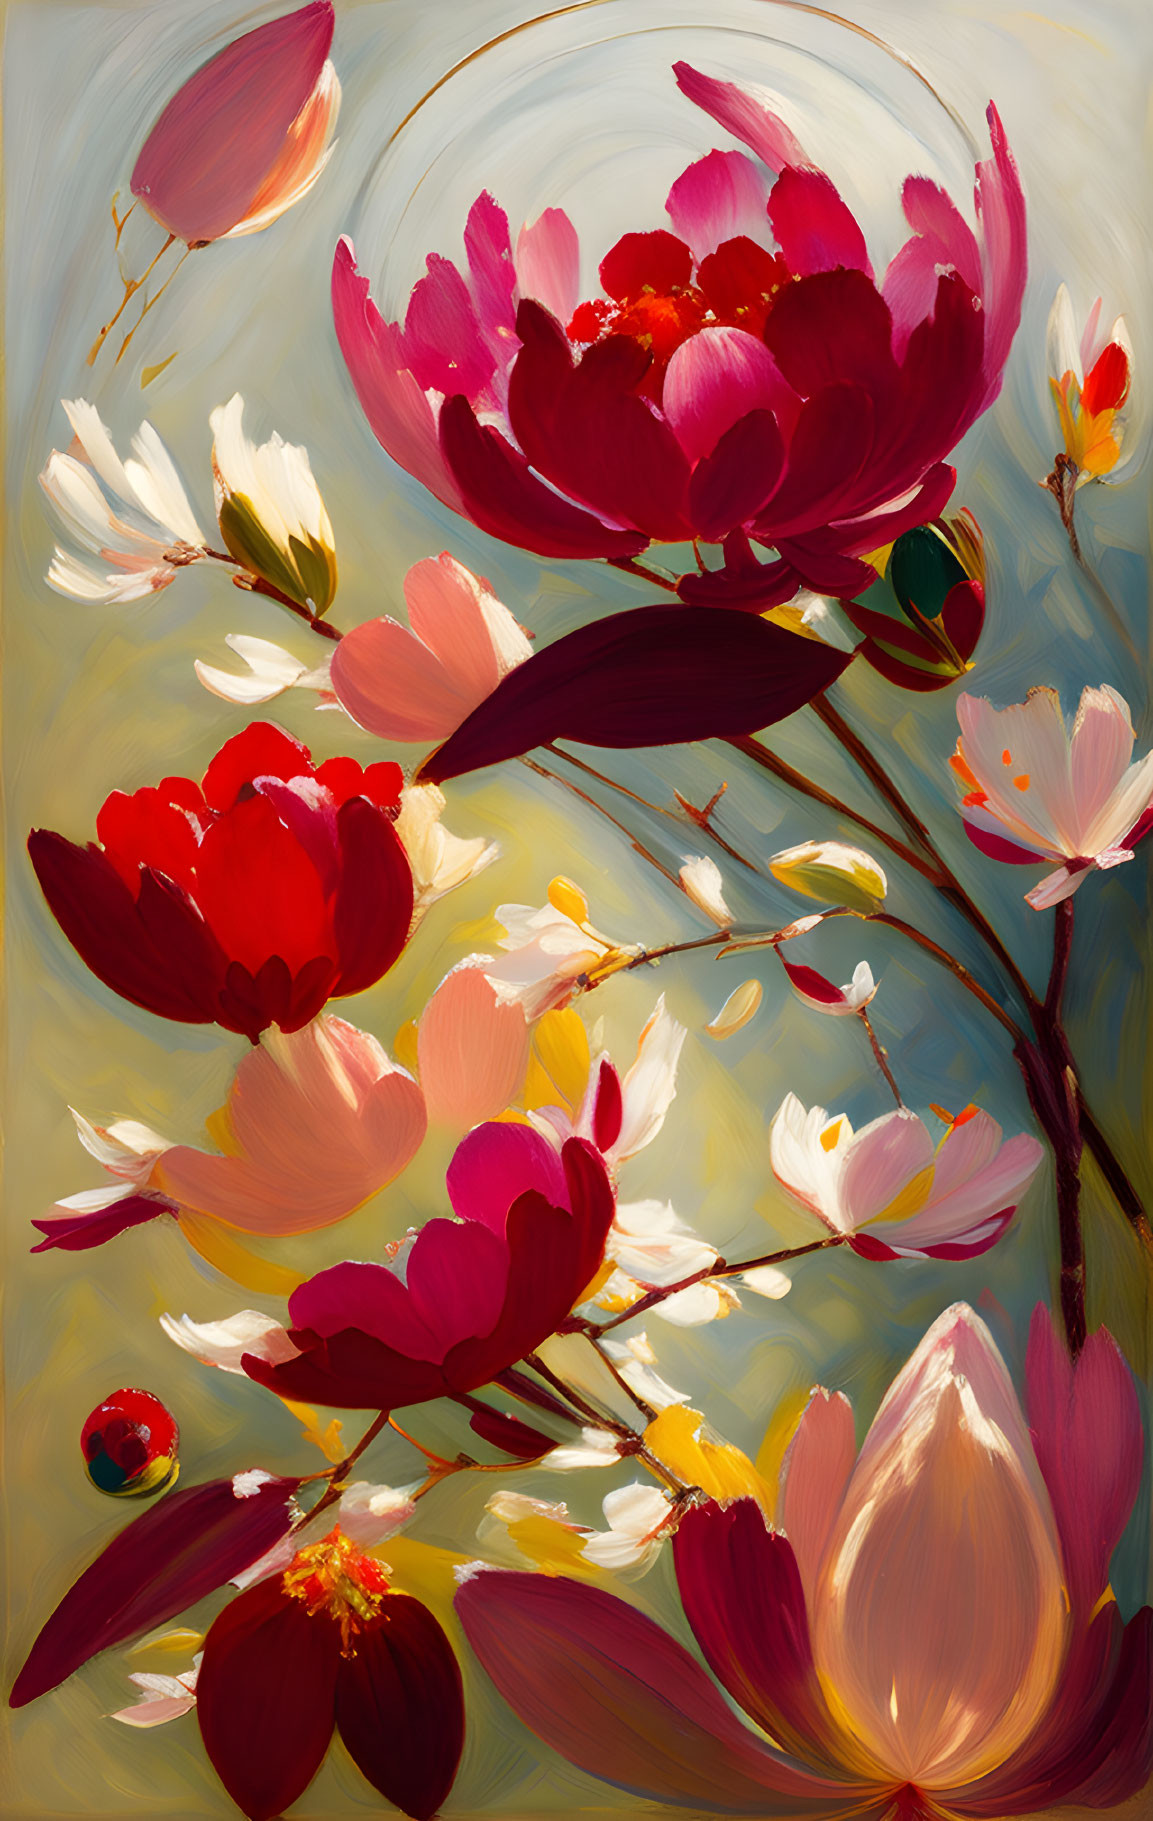 Colorful Stylized Blossoms Painting in Red and Pink